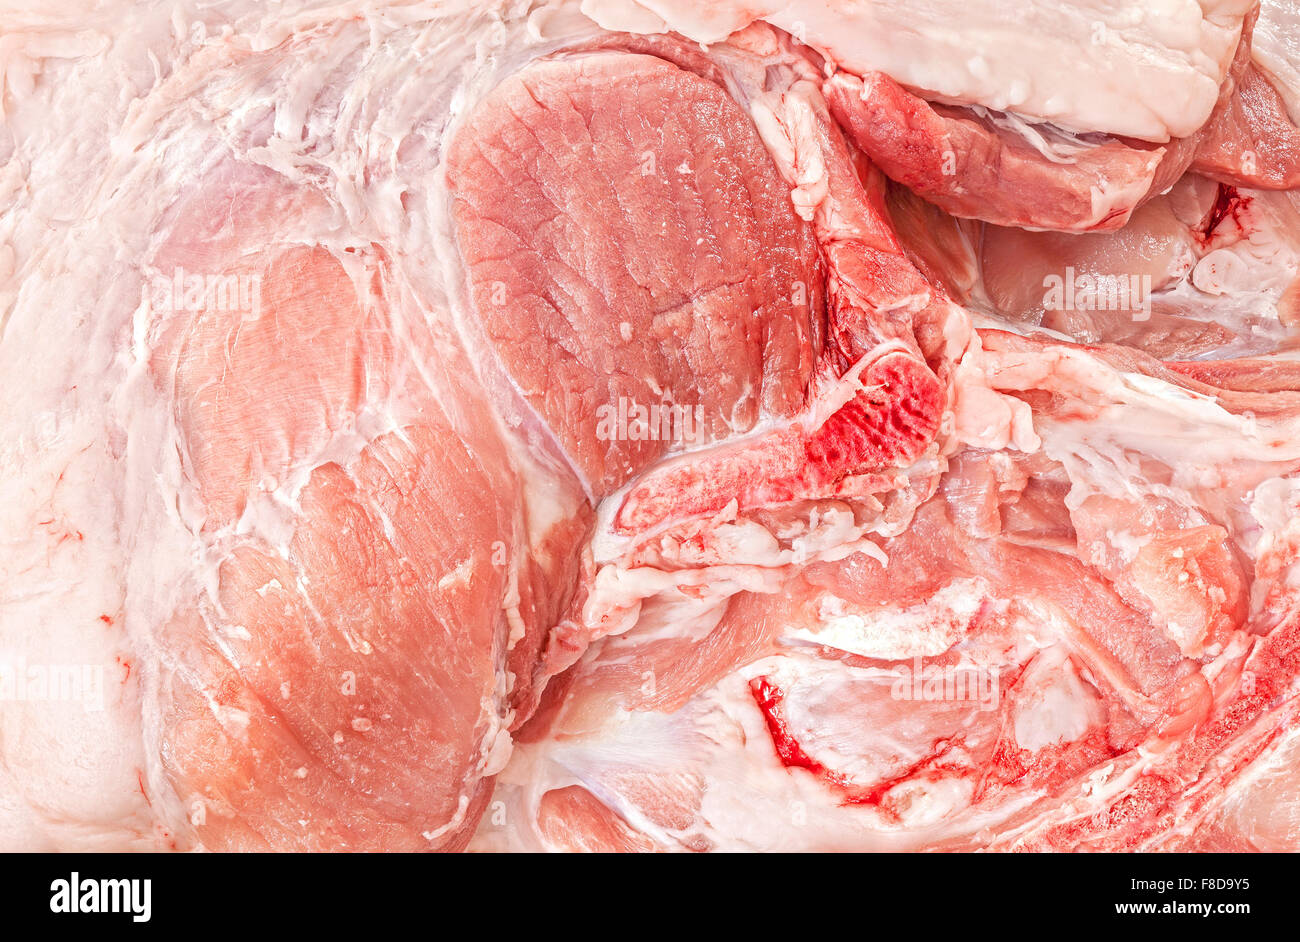 Extreme close up picture of pork leg fresh meat. Stock Photo